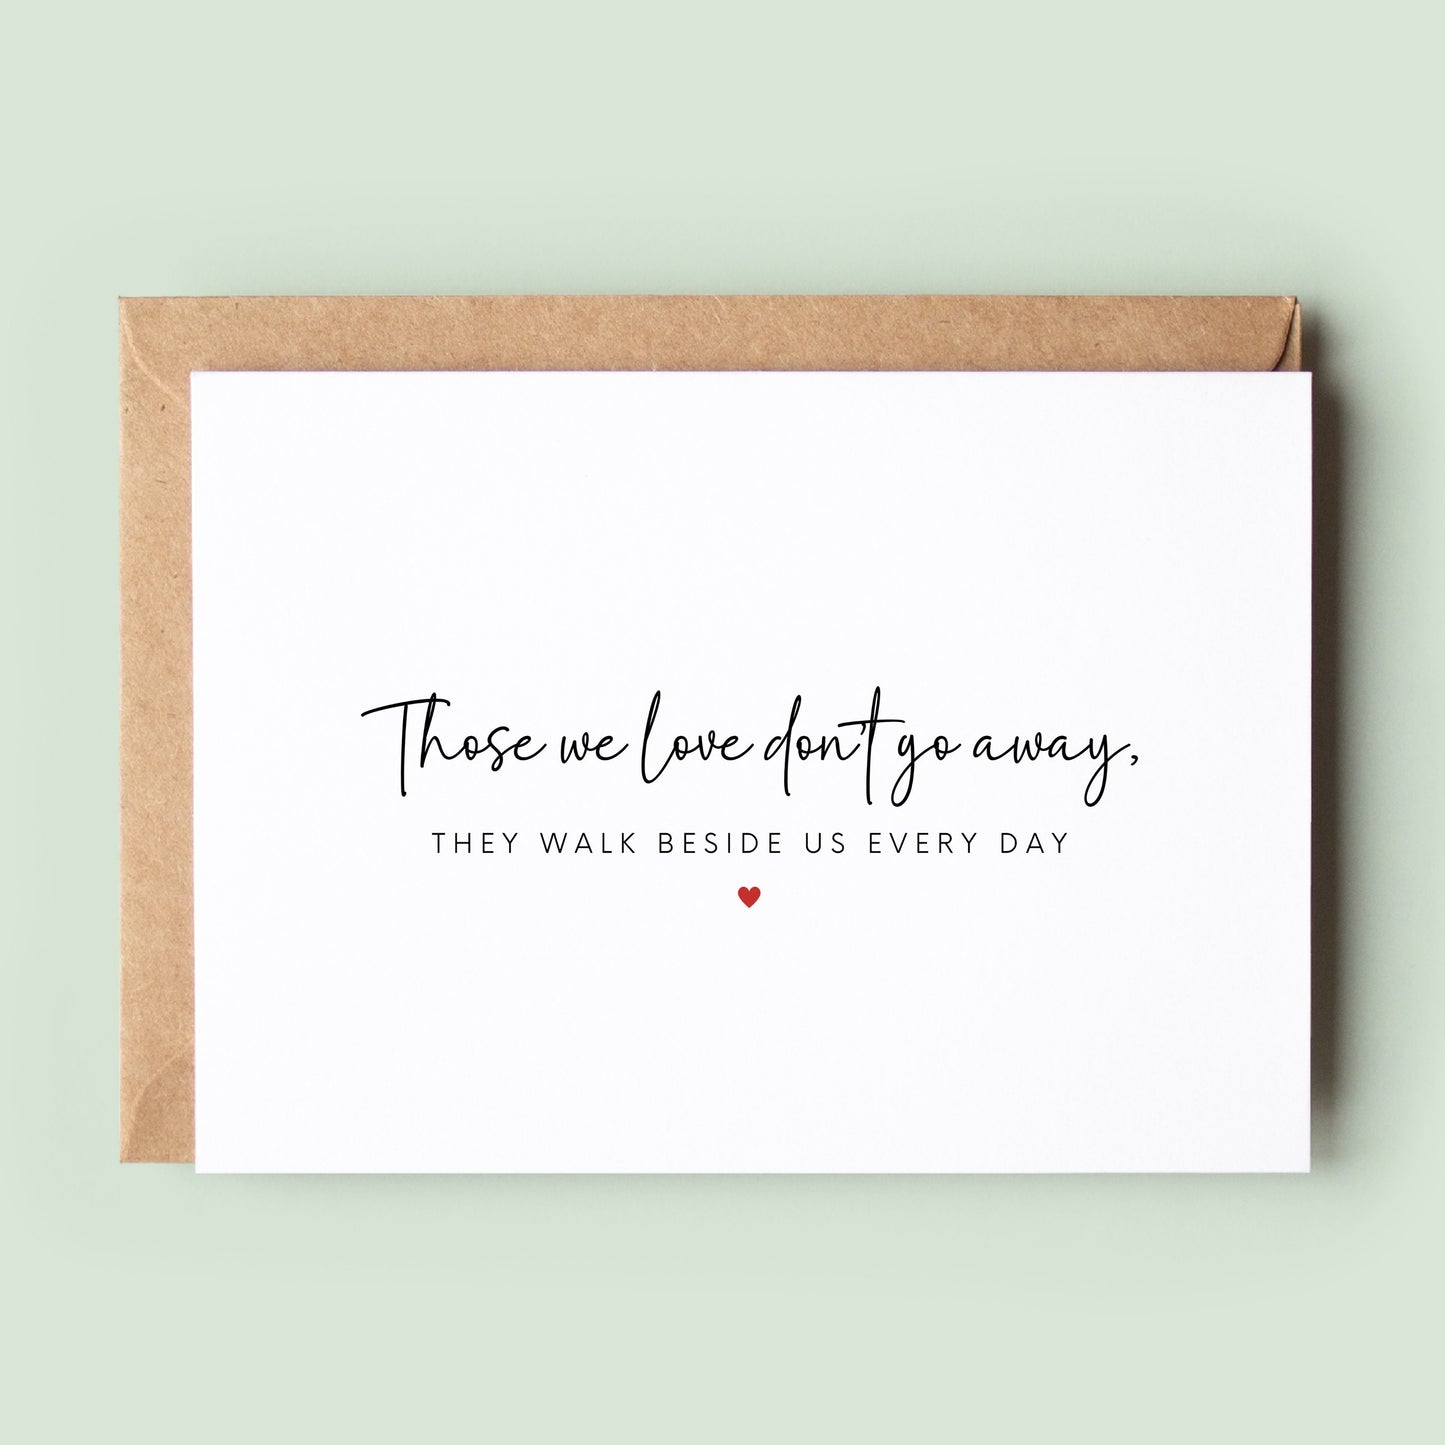 Those We Love Don't Go Away, Sympathy Card, Encouragement Card, Condolence Card, Bereavement Card, Thinking of You - #211